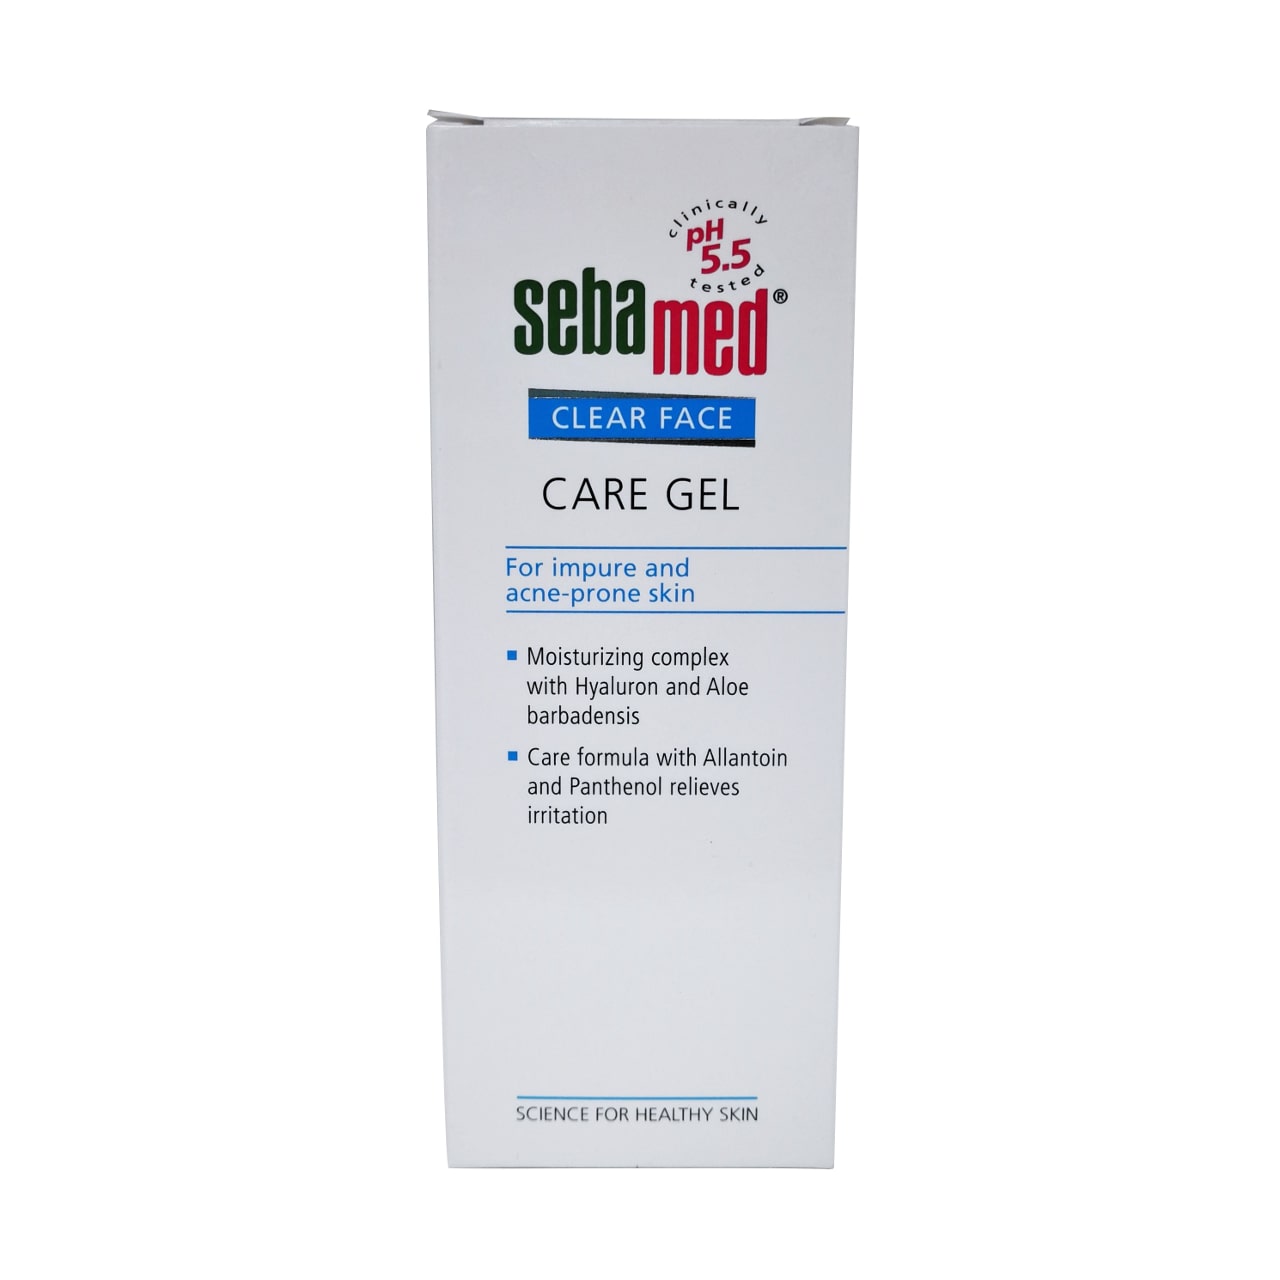 Product label for Sebamed Clear Face Care Gel in English